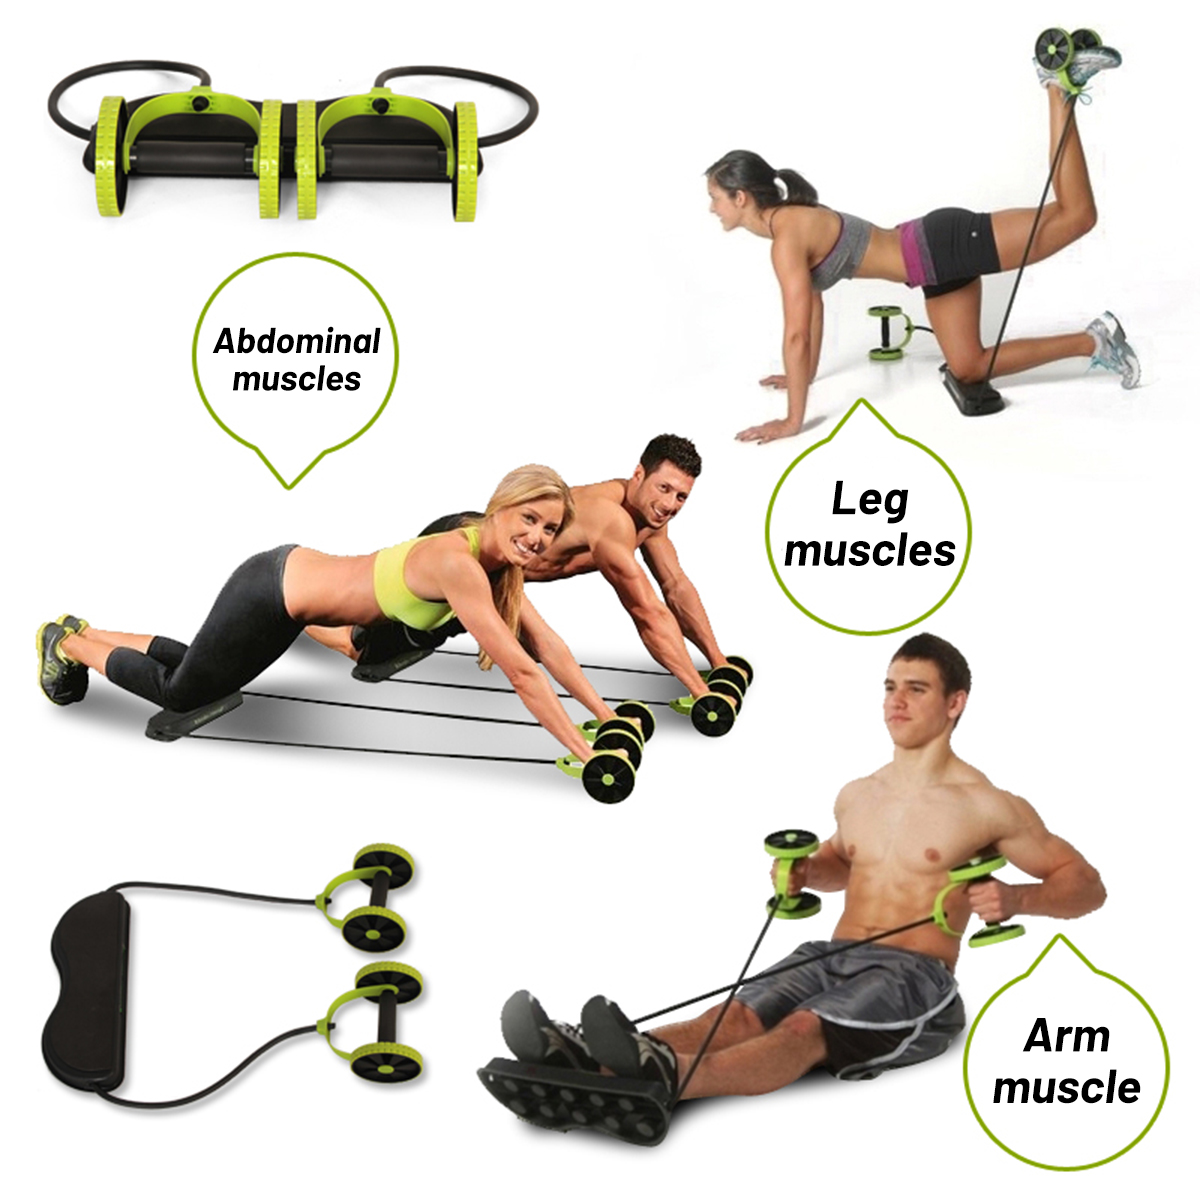 Double Ab Roller Wheels Exercise and Fitness Wheel for Home Gym Waist Slimming Trainer - image 2 of 5